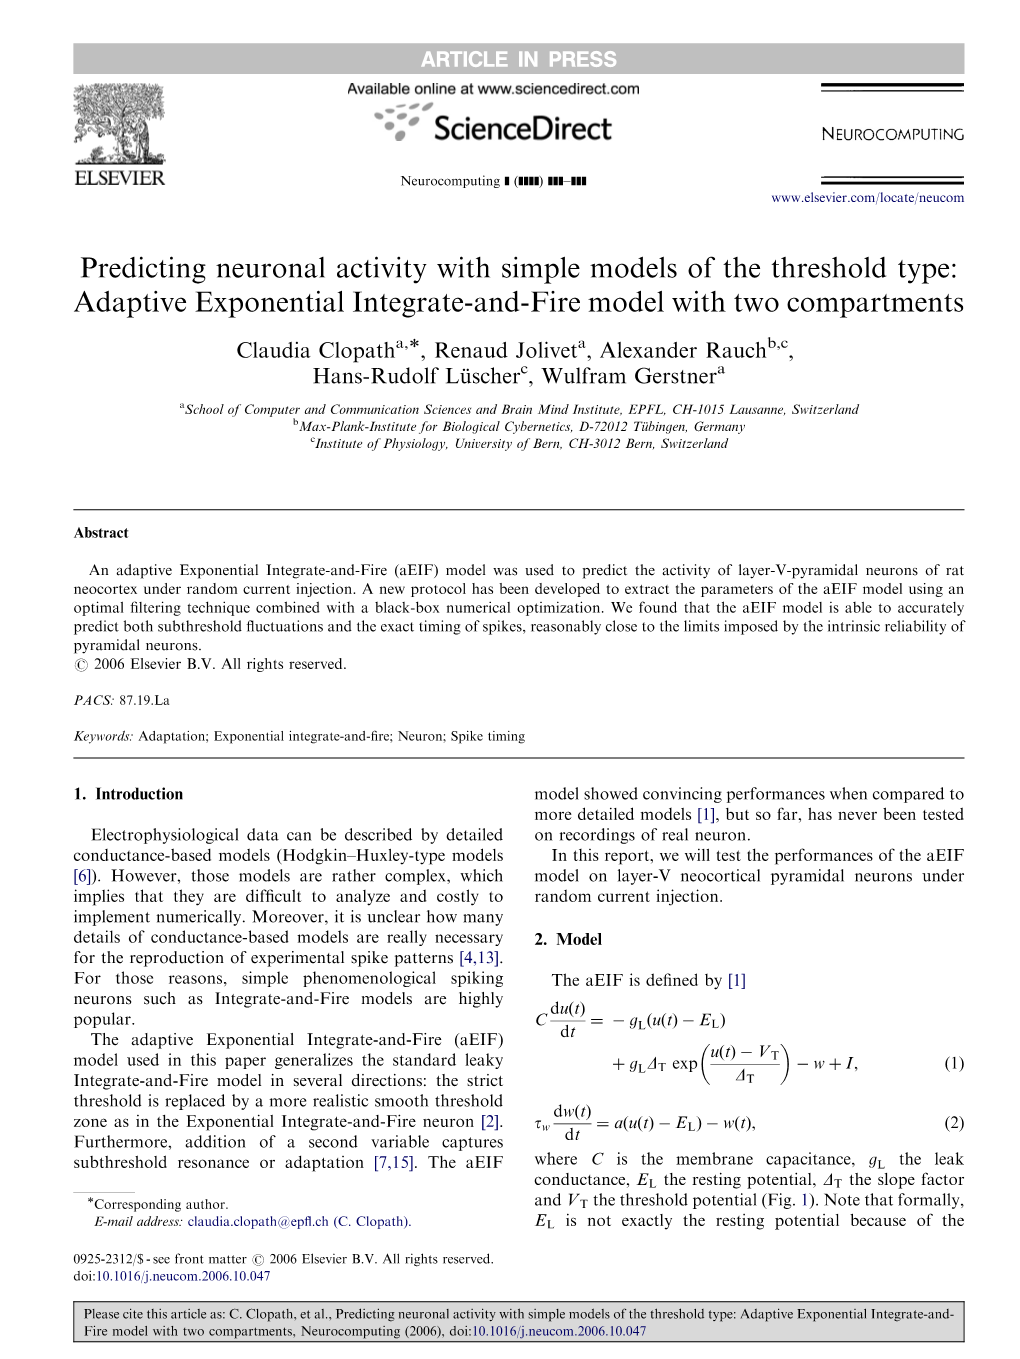 Predicting Neuronal Activity with Simple Models of the Threshold Type: Adaptive Exponential Integrate-And-Fire Model with Two Compartments